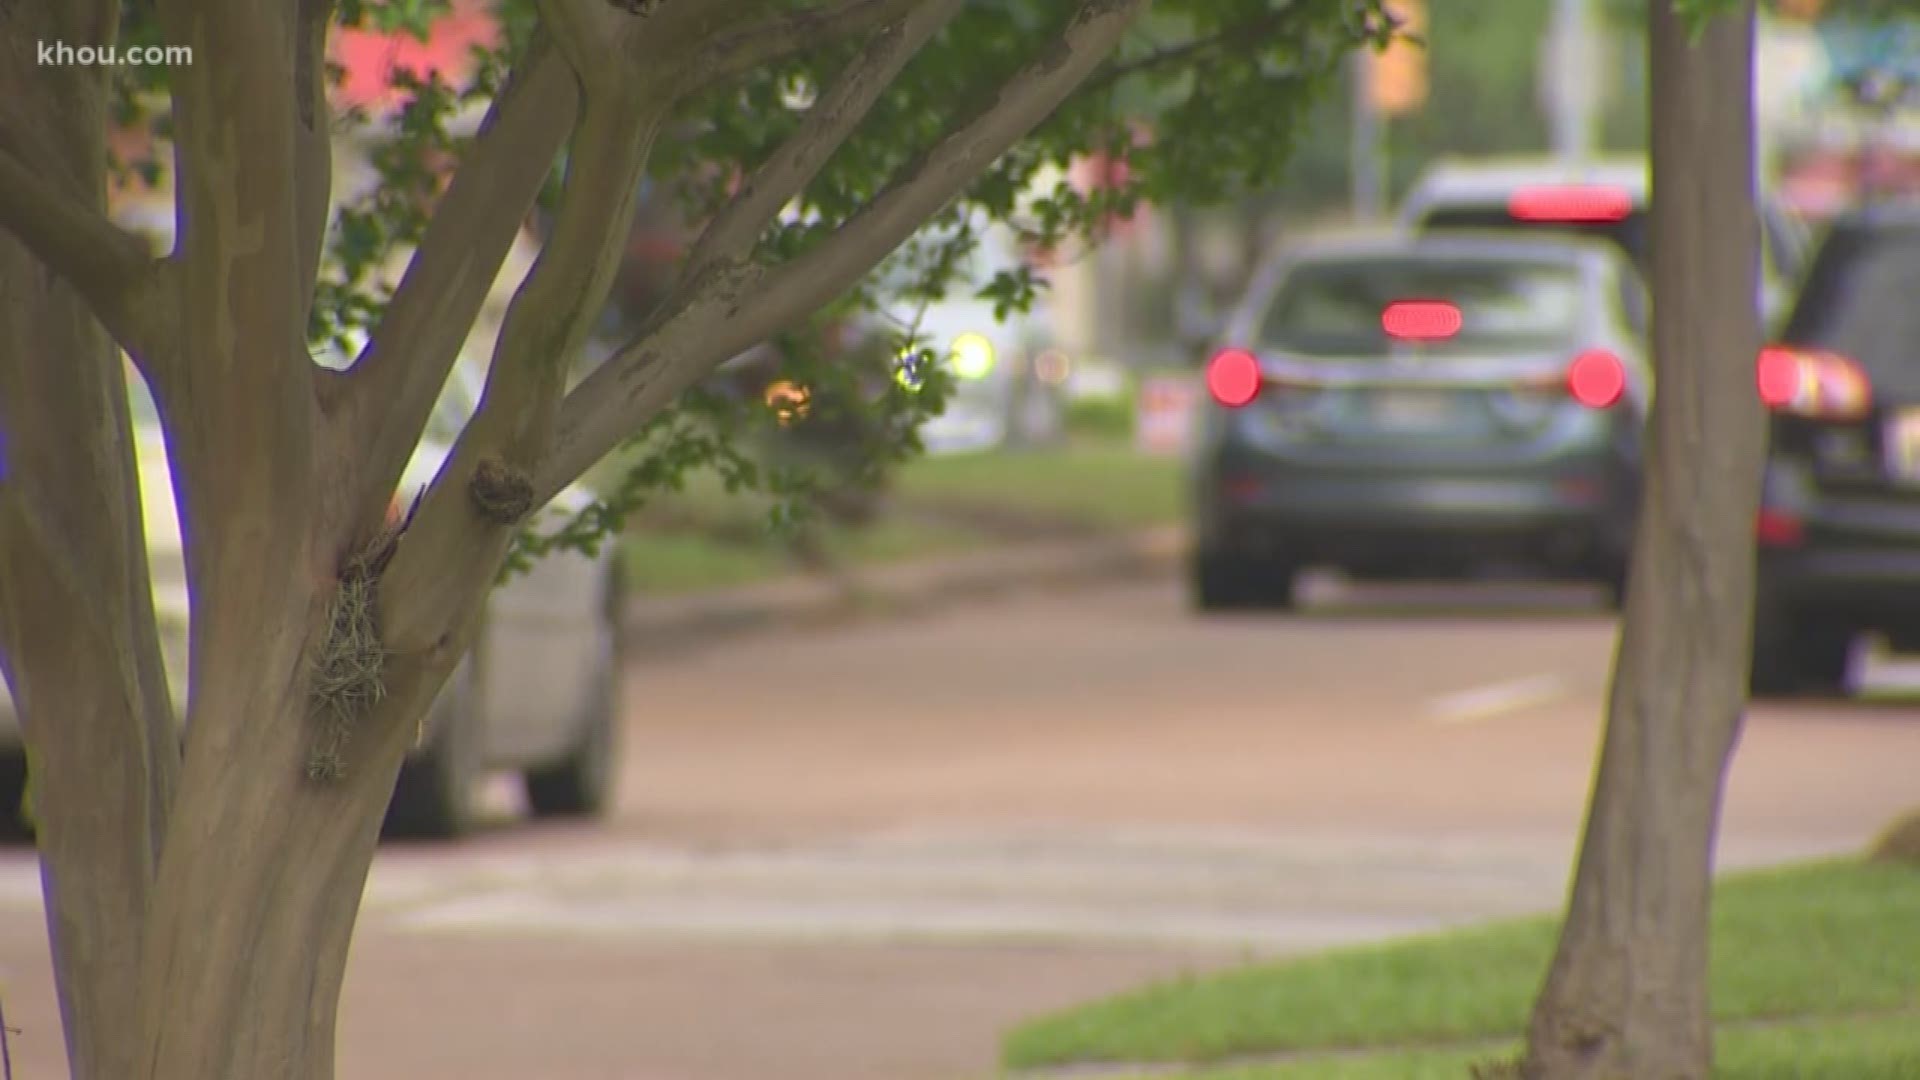 Big changes are coming to busy streets around Houston that will make them safer for pedestrians and more accessible for people with disabilities.